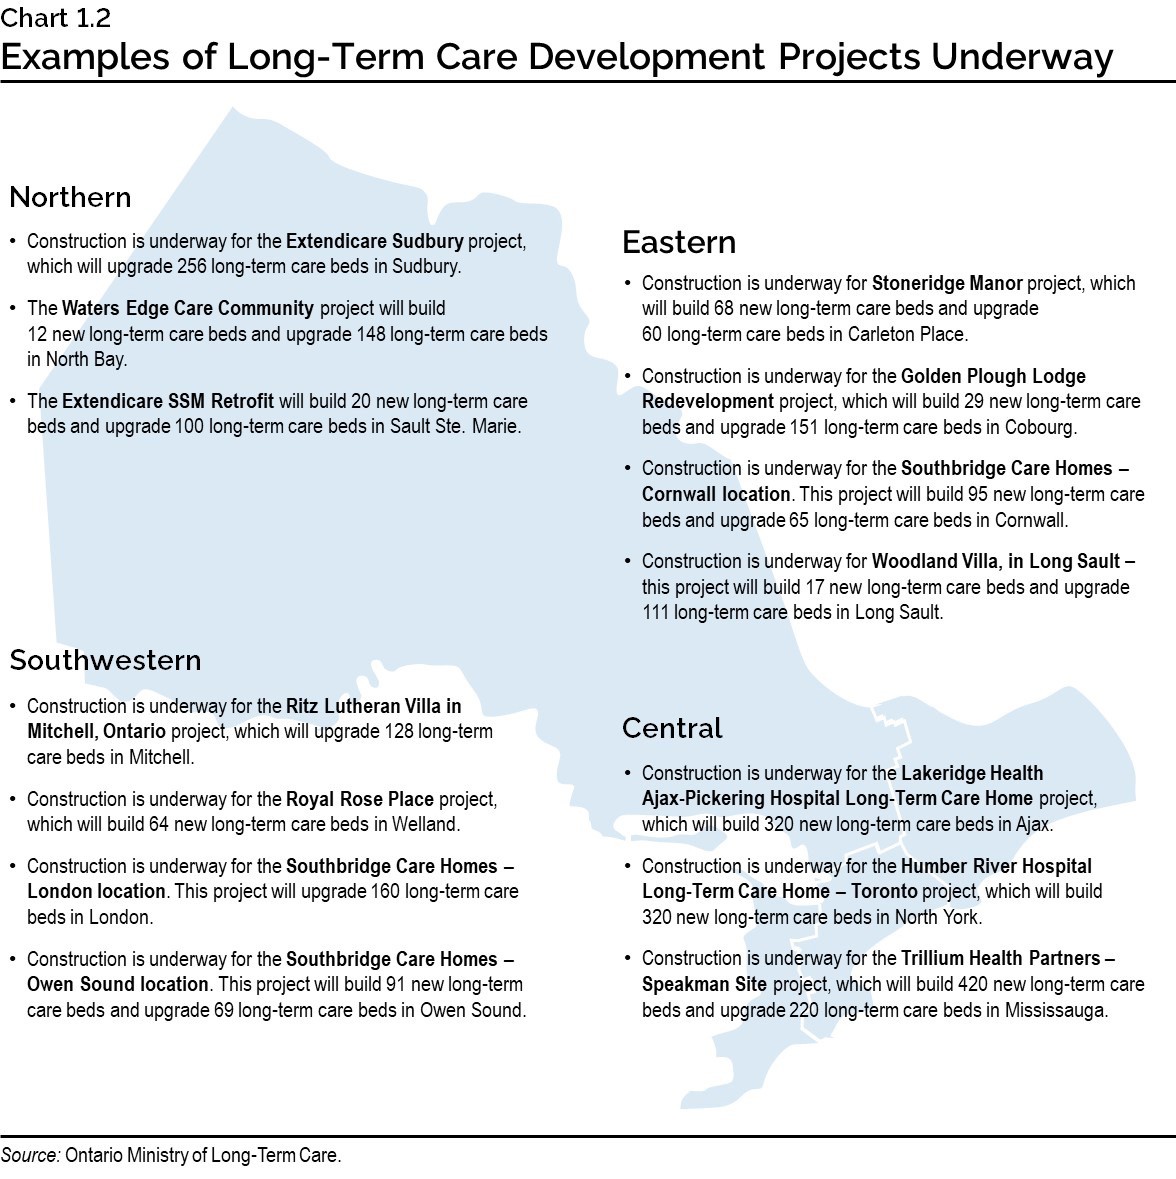 Chart 1.2: Examples of Long-Term Care Development Projects Underway